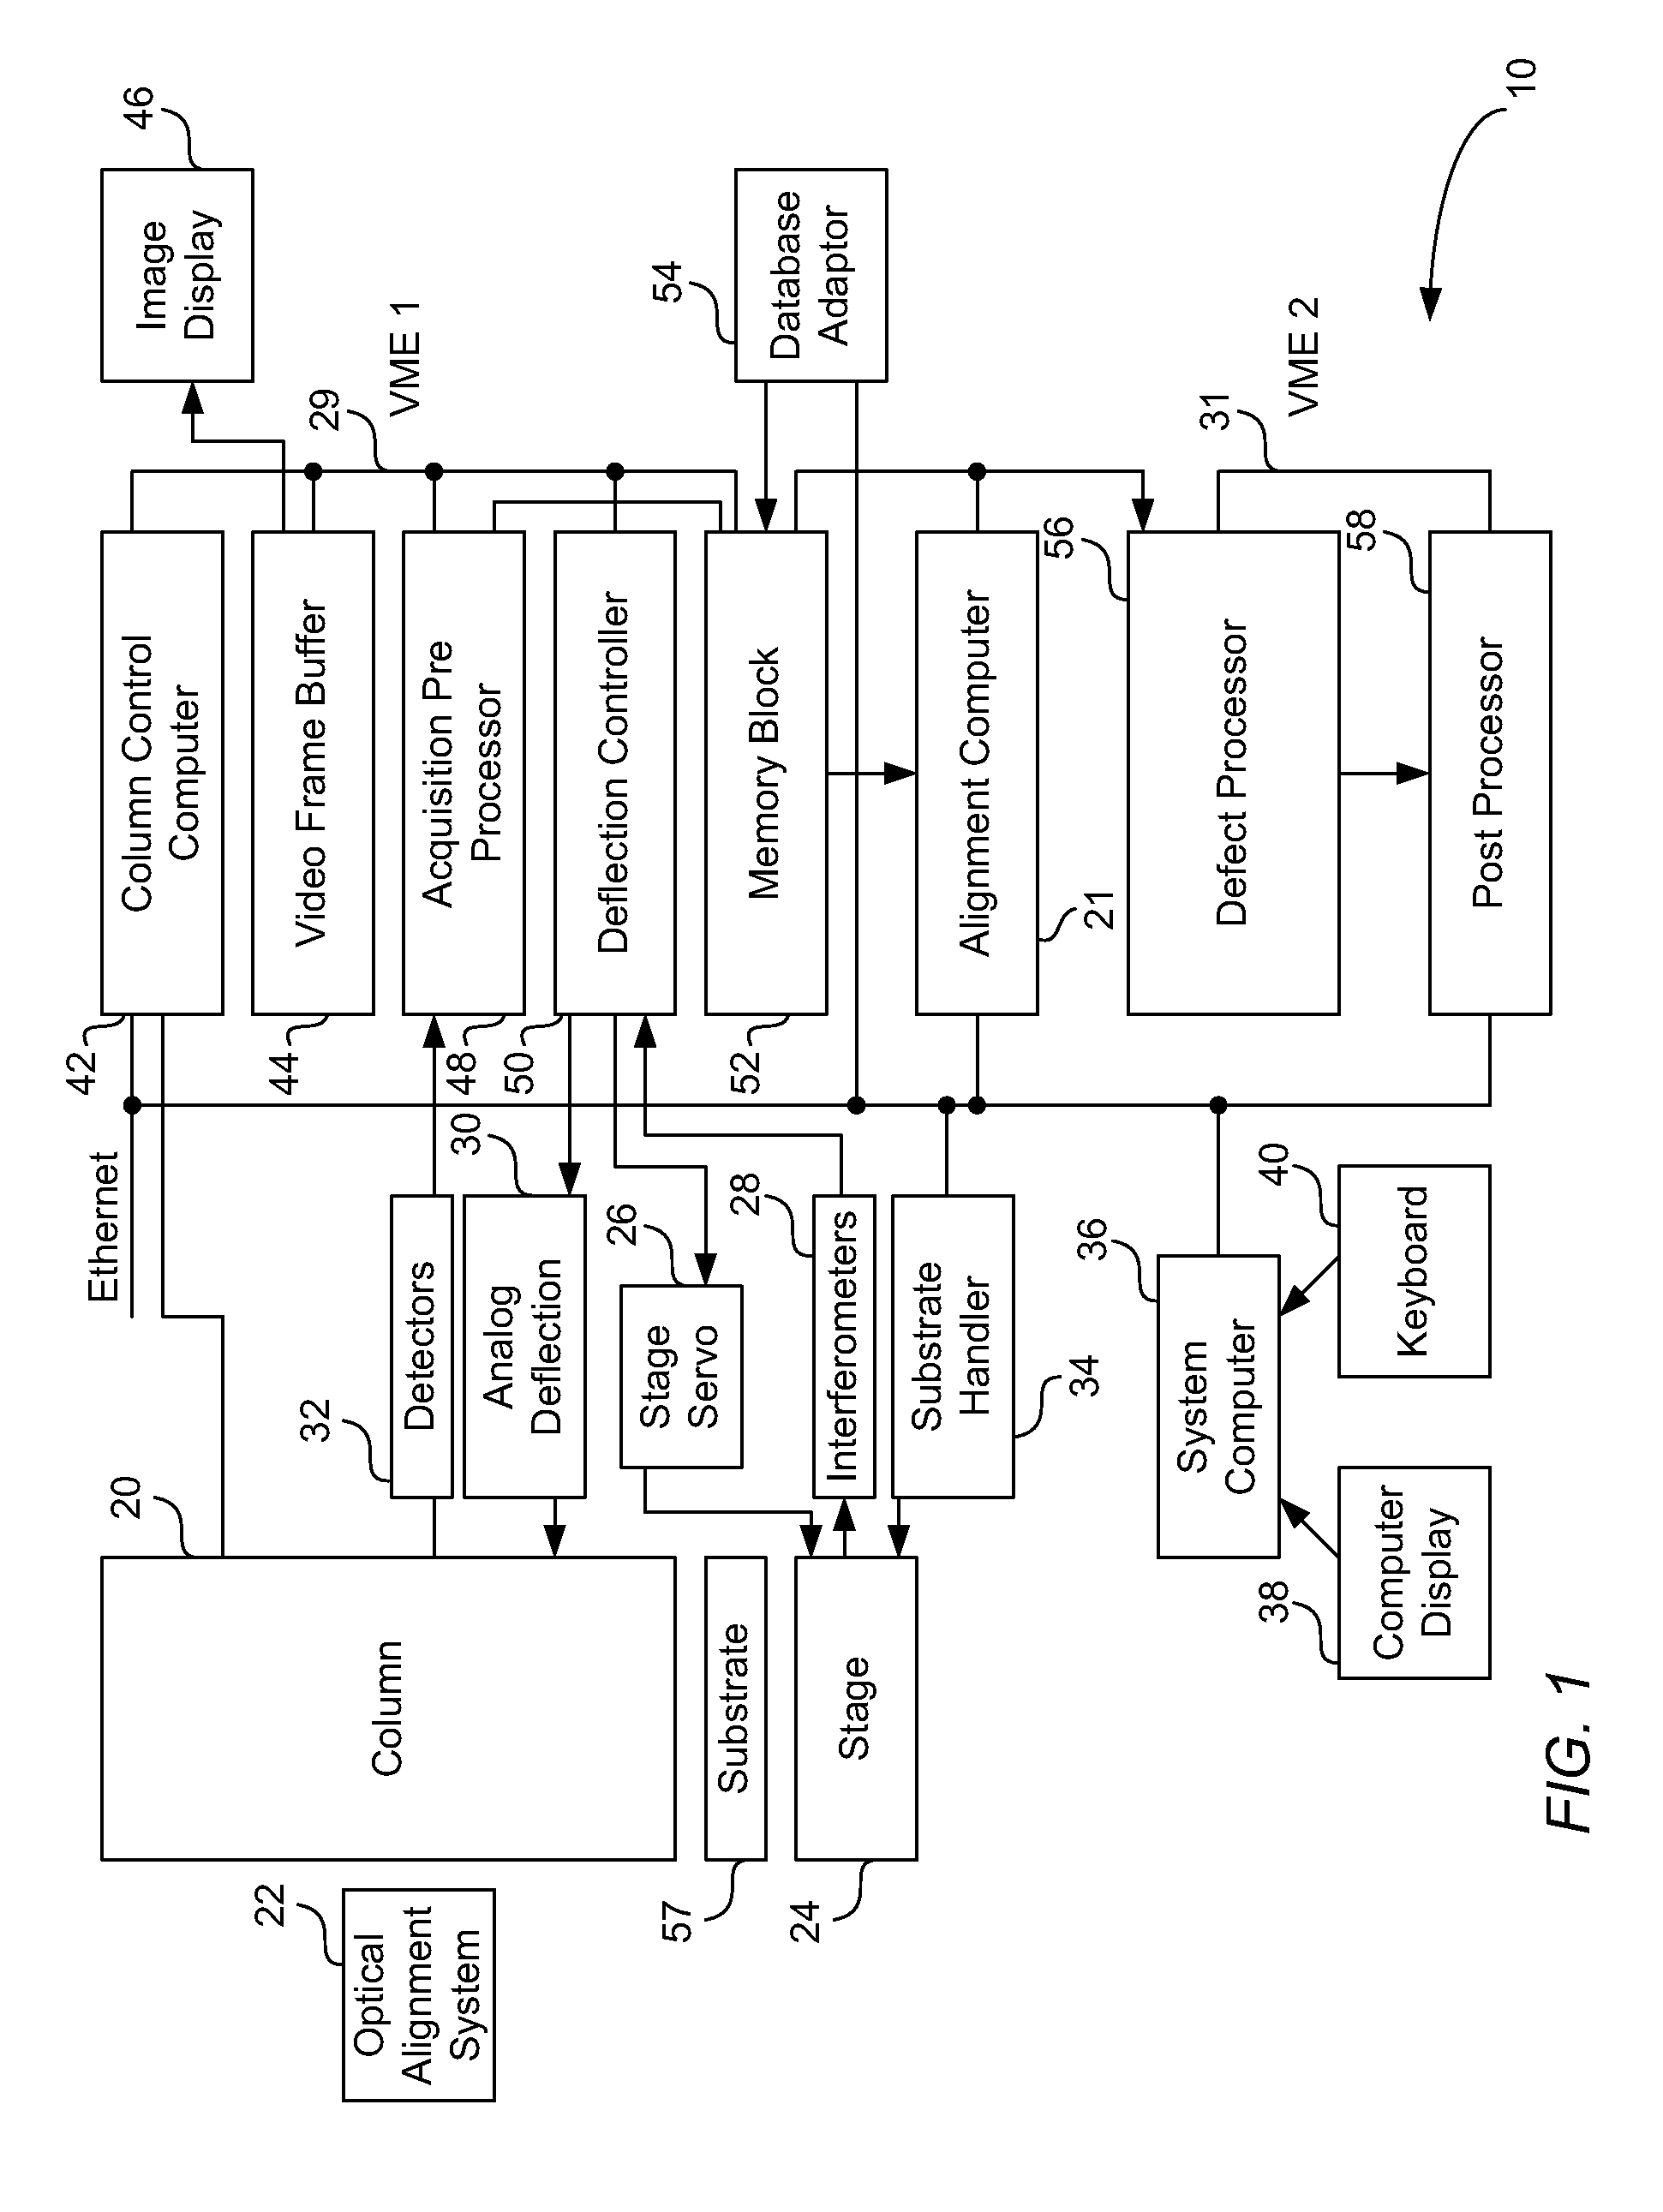 Multiple directional scans of test structures on semiconductor integrated circuits